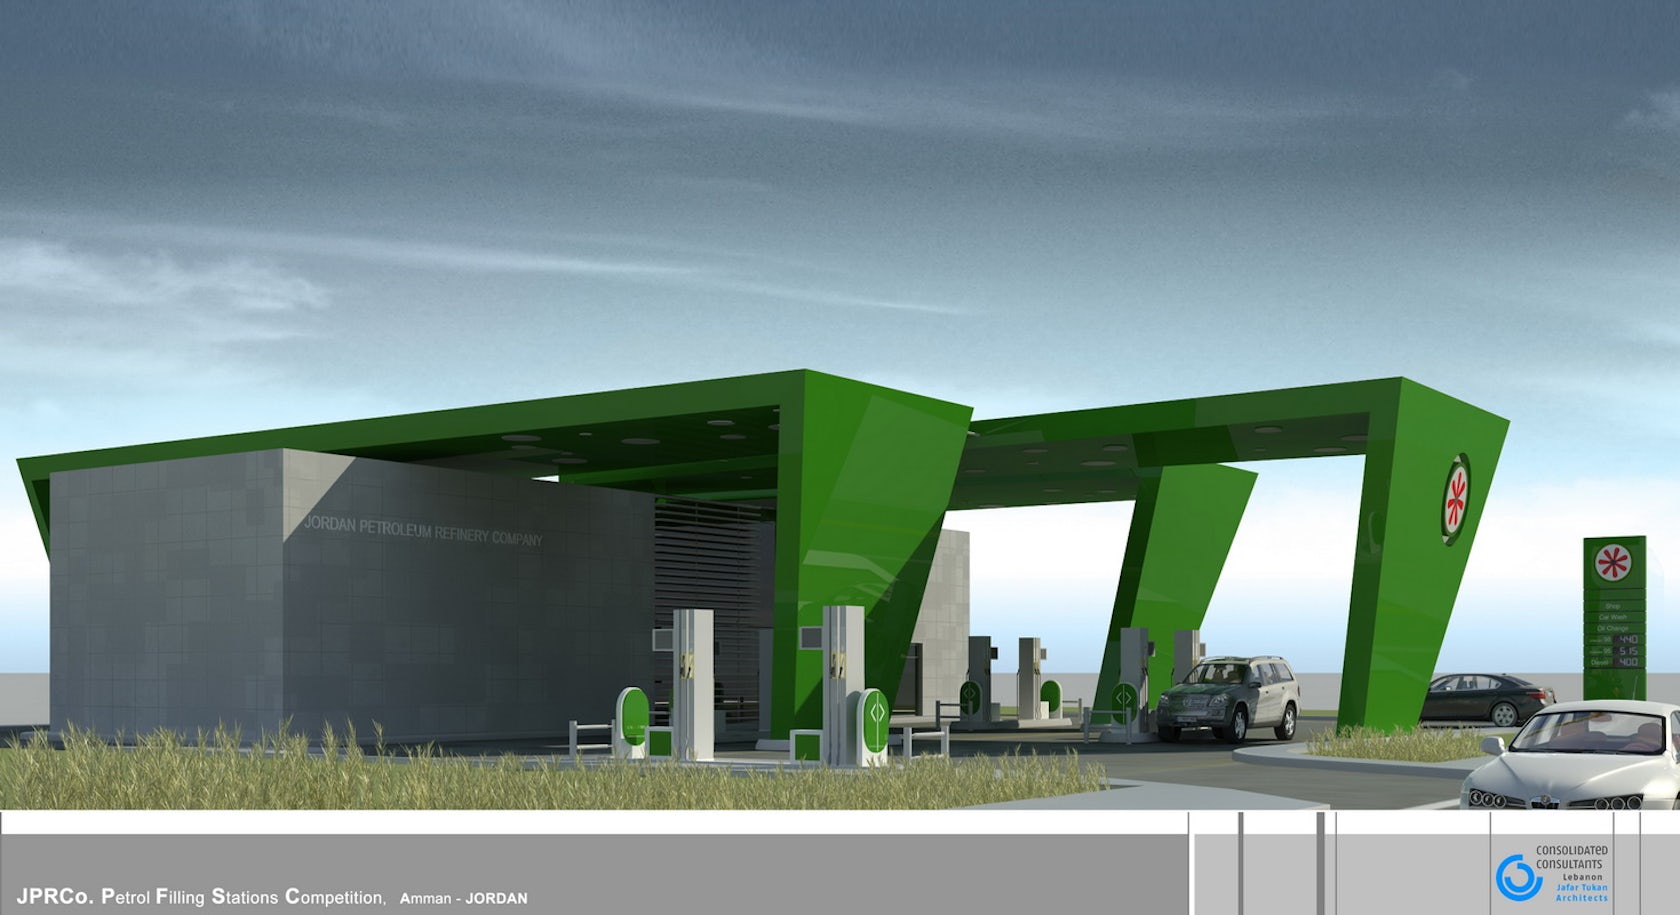 JPRC GAS STATION |Winner Design of The JPRC Stations Competition